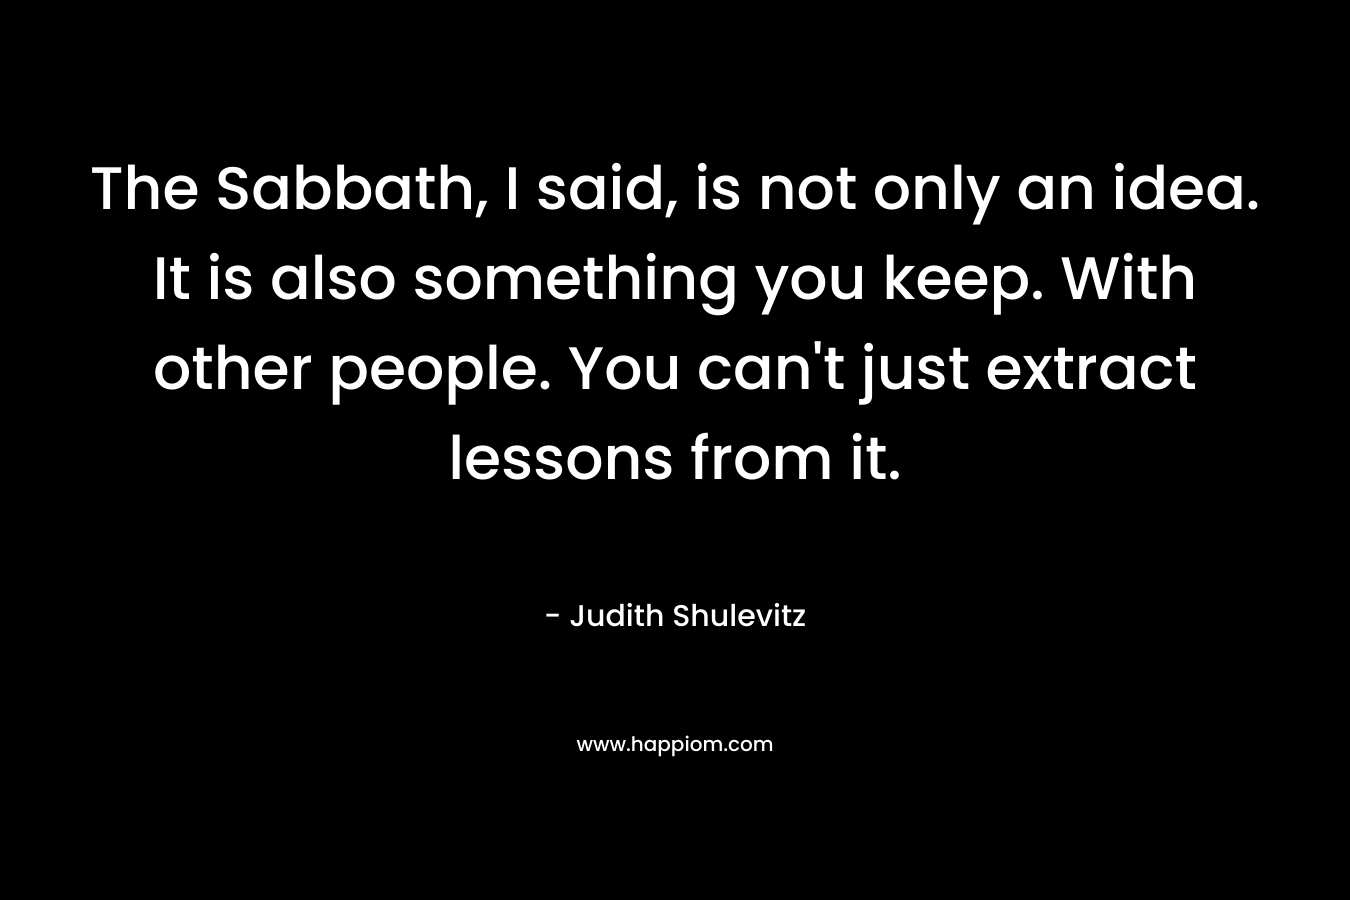 The Sabbath, I said, is not only an idea. It is also something you keep. With other people. You can't just extract lessons from it.